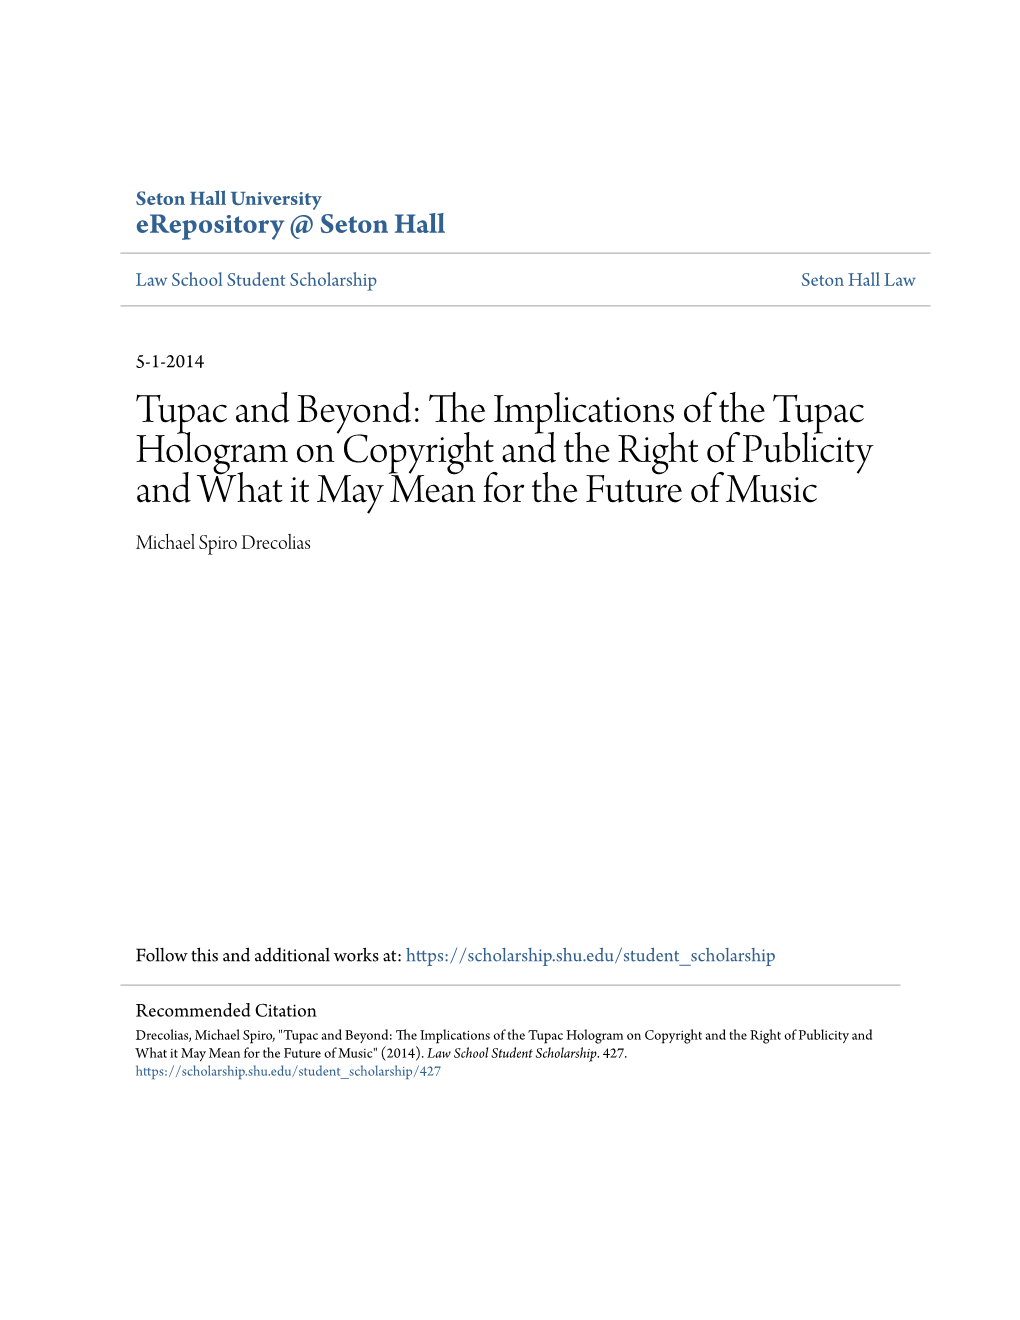 Tupac and Beyond: the Mplici Ations of the Tupac Hologram on Copyright and the Right of Publicity and What It May Mean for the Future of Music Michael Spiro Drecolias